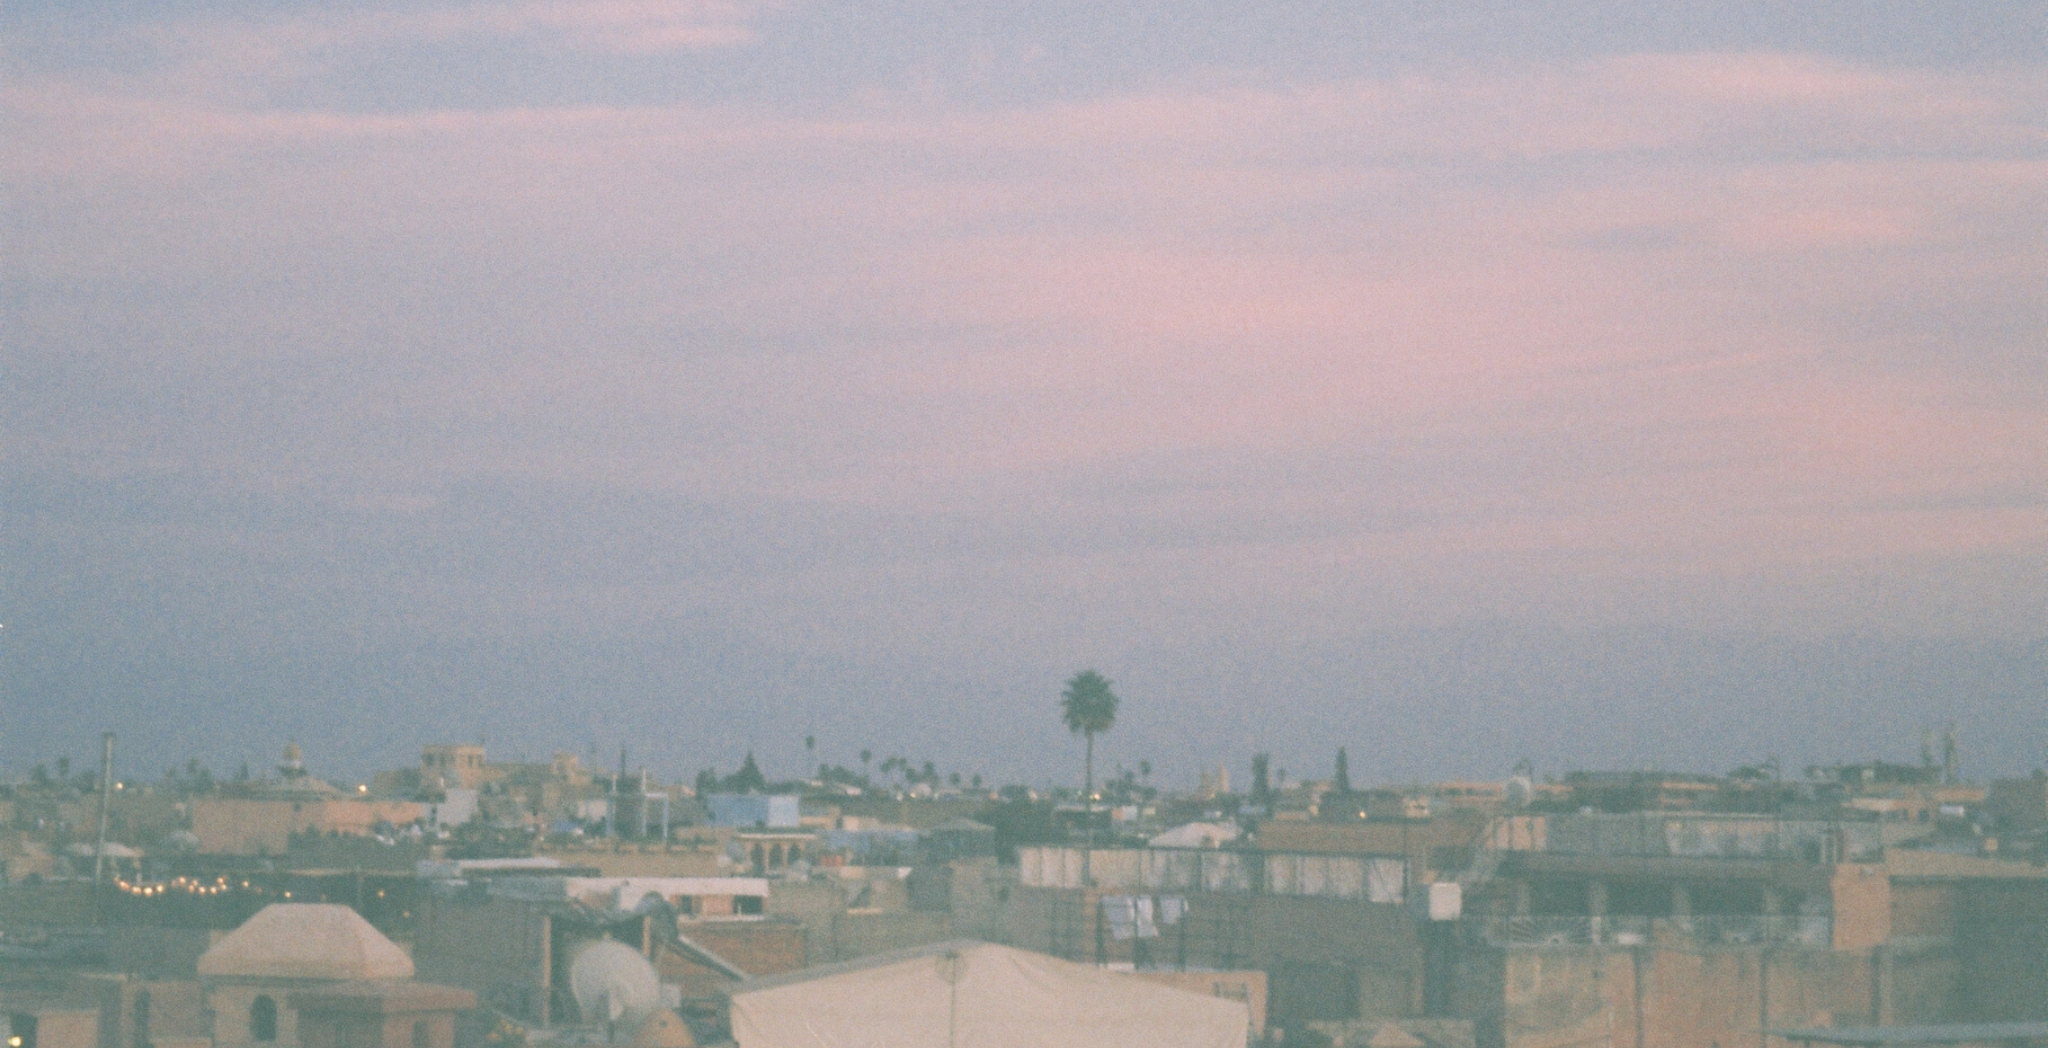 Morocco on film, sunsets in Marrakech